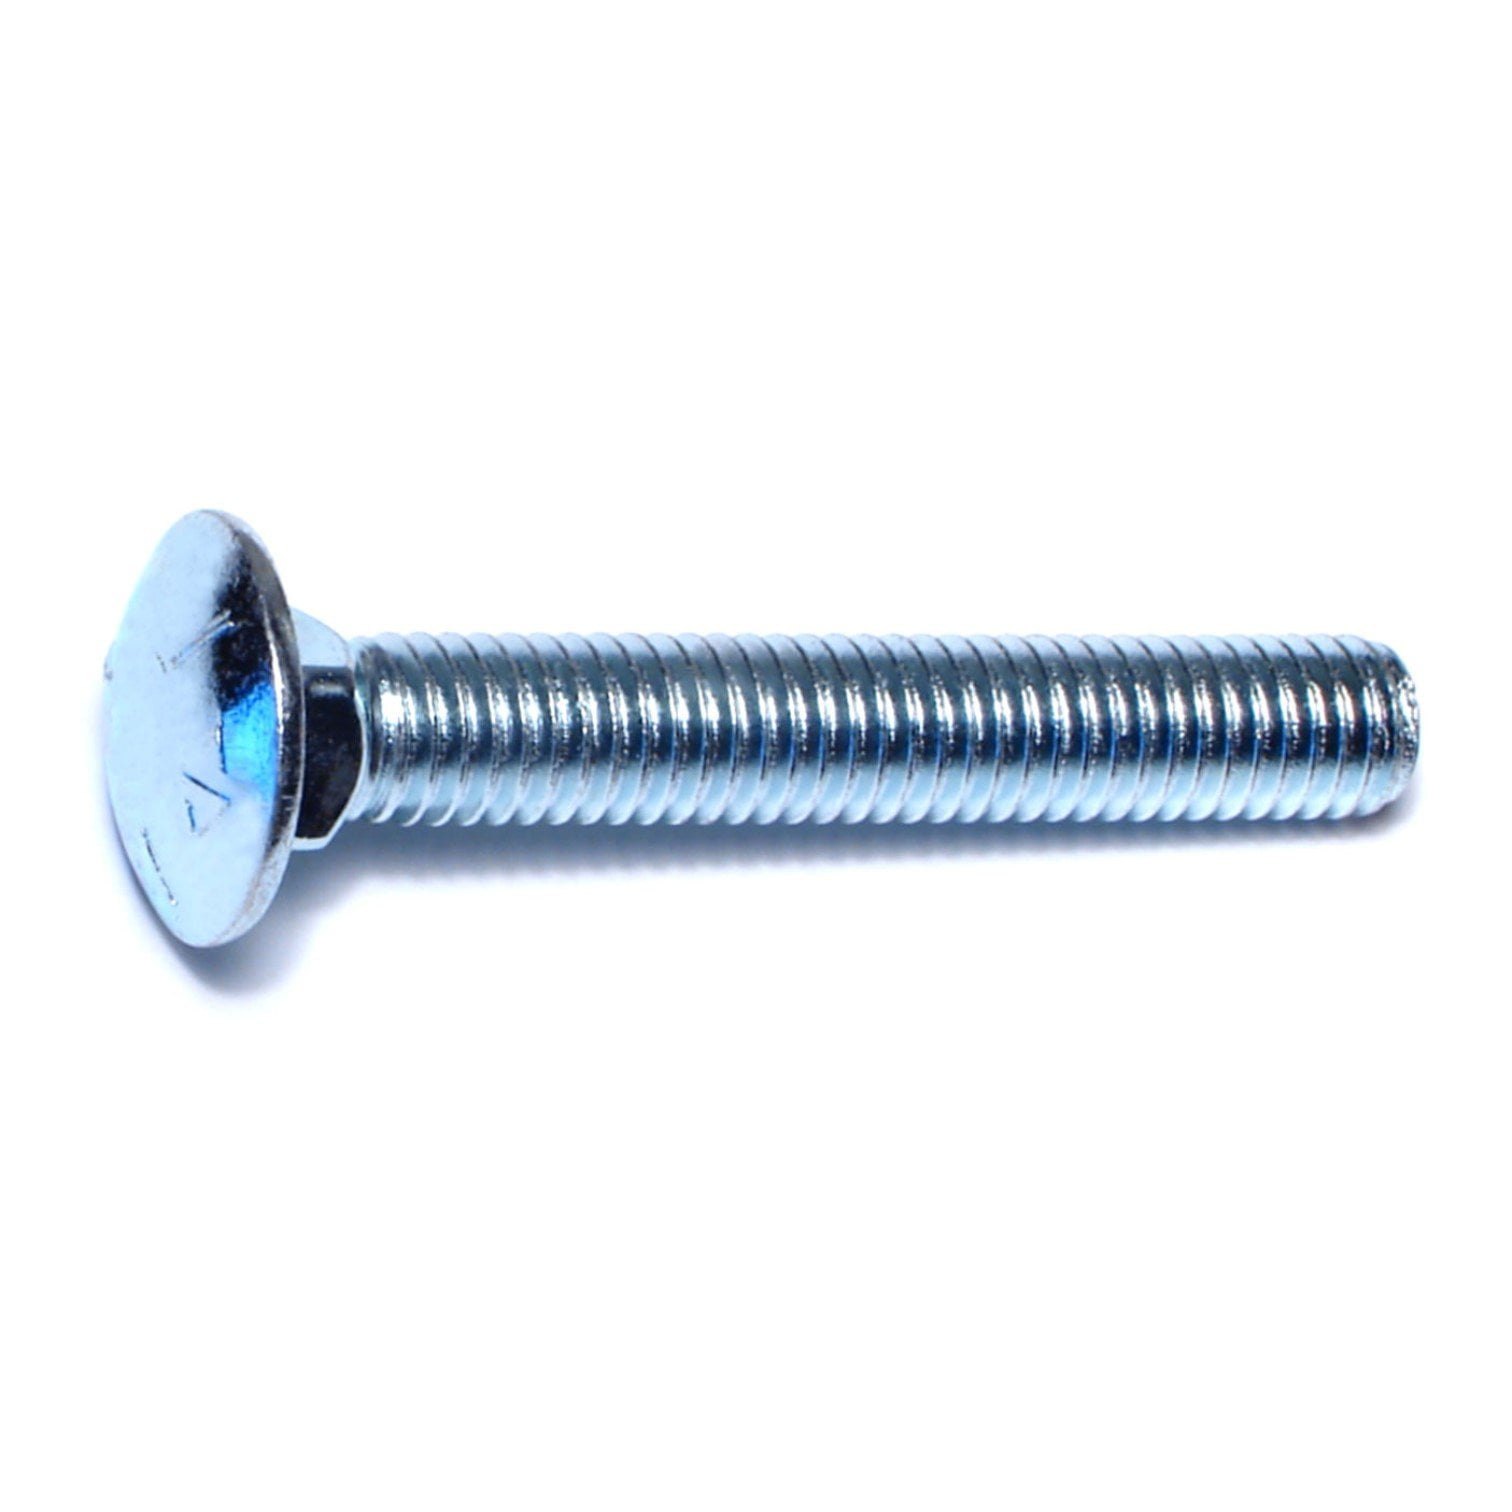 Spring Zinc Plated 3/8"-16 Coarse Thread Toggle Wing Only 